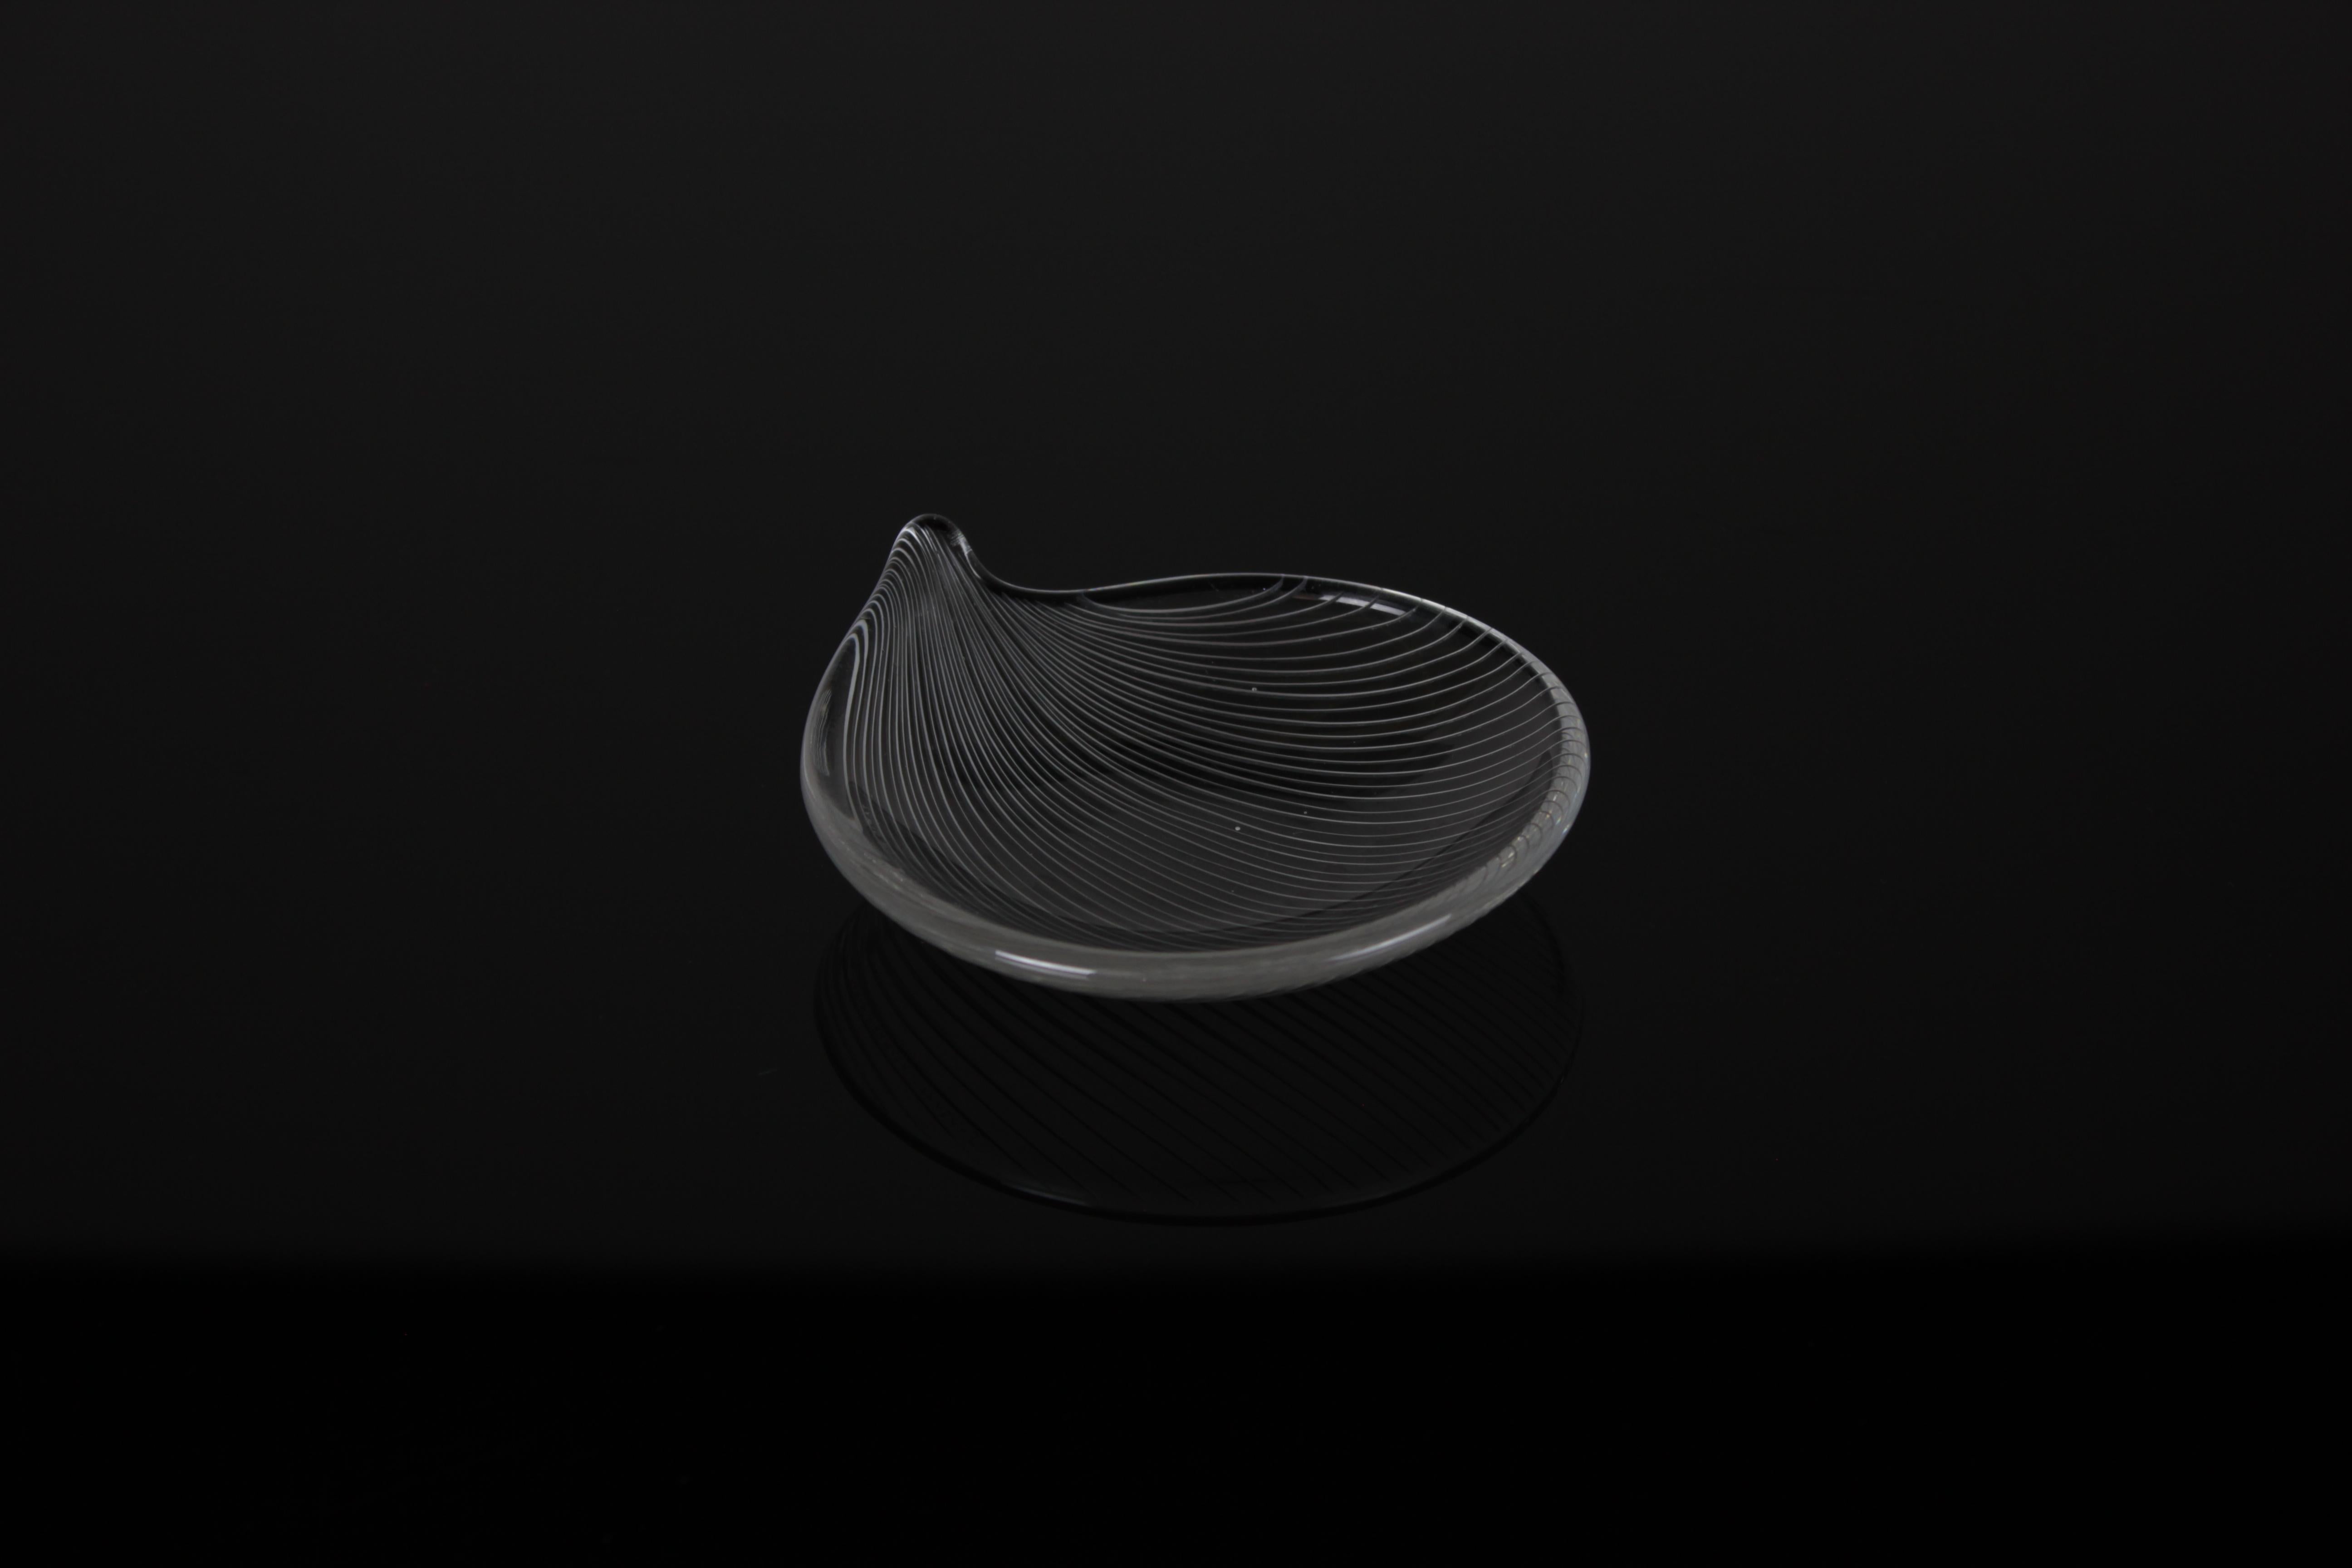 Immerse yourself in the timeless allure of mid-century modern design with this exquisite glass dish crafted by the legendary Tapio Wirkkala for Iittala. Shaped like a delicate leaf, this masterfully designed piece captures the essence of nature with